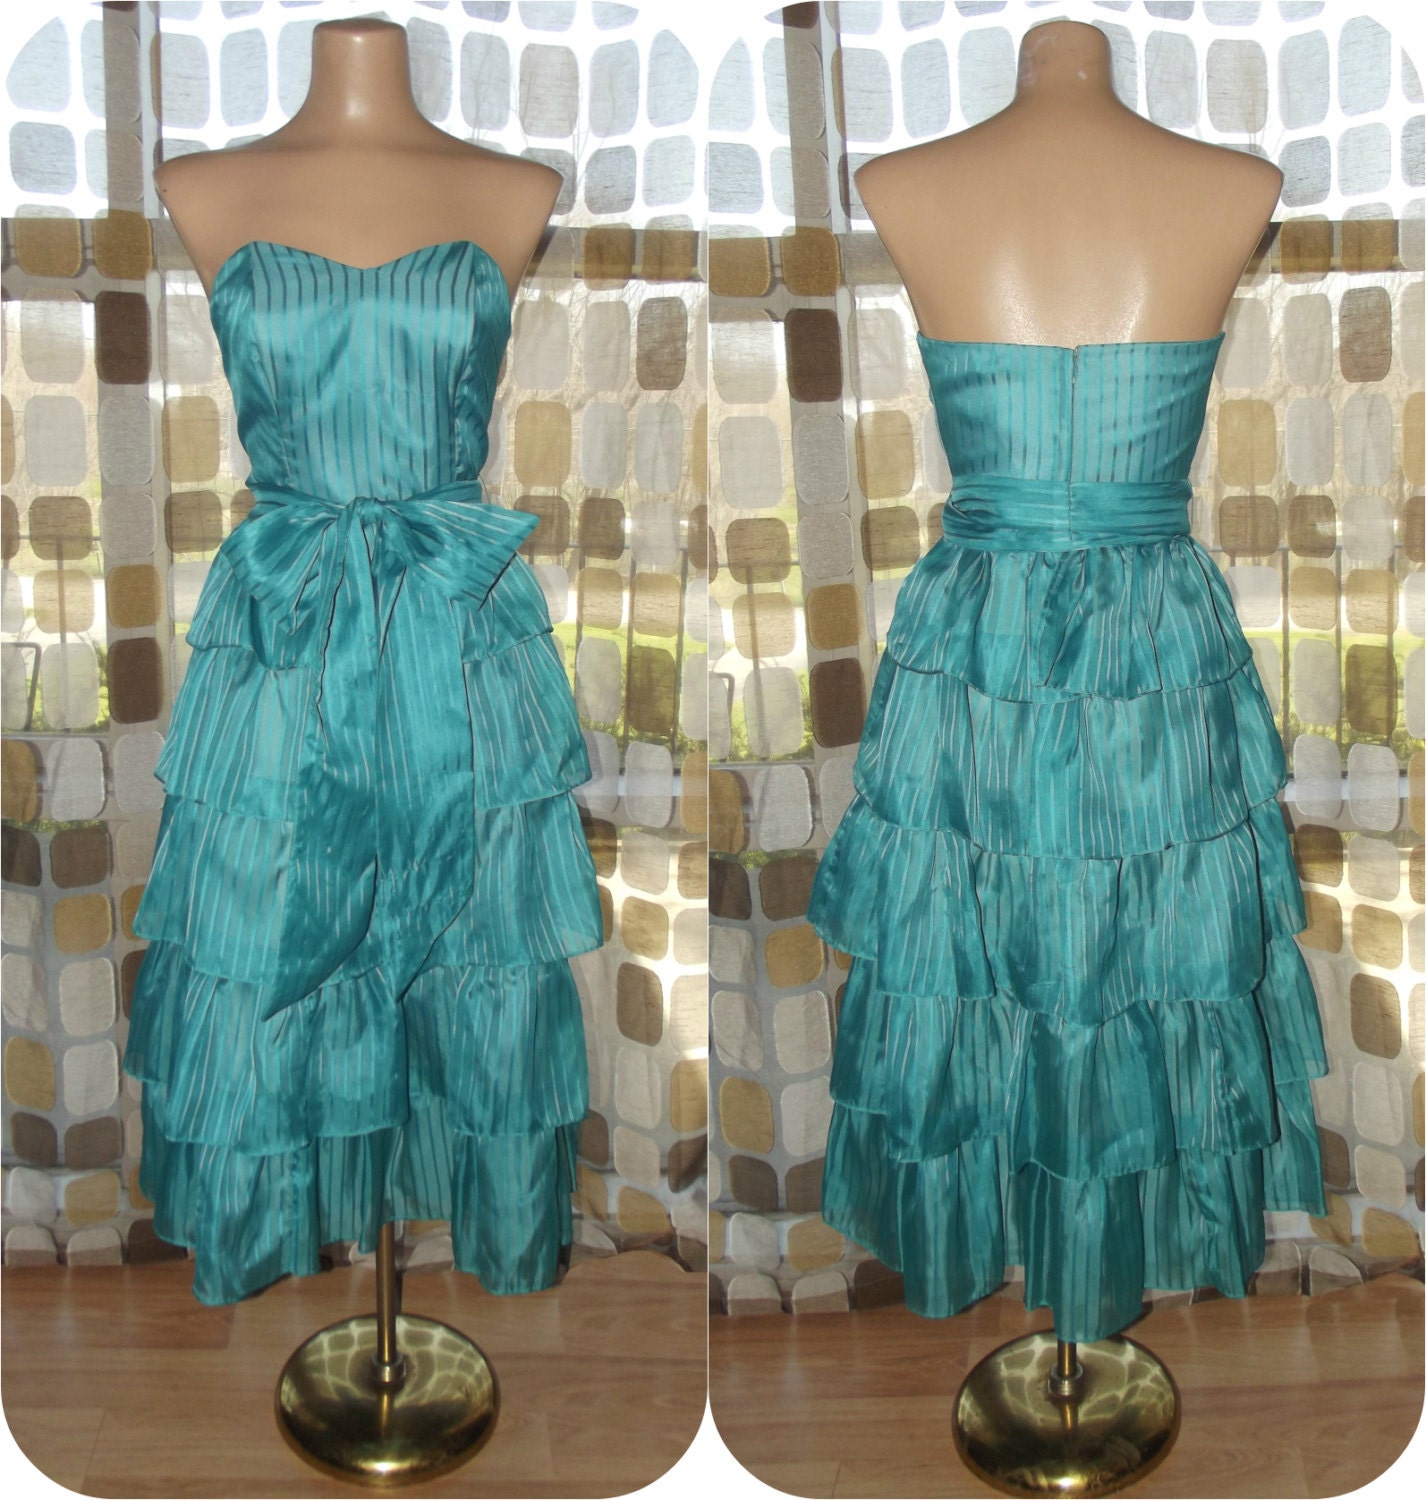 https://www.etsy.com/listing/290052675/vintage-70s-80s-teal-sheer-chiffon?ga_search_query=formal+dress&ref=shop_items_search_7